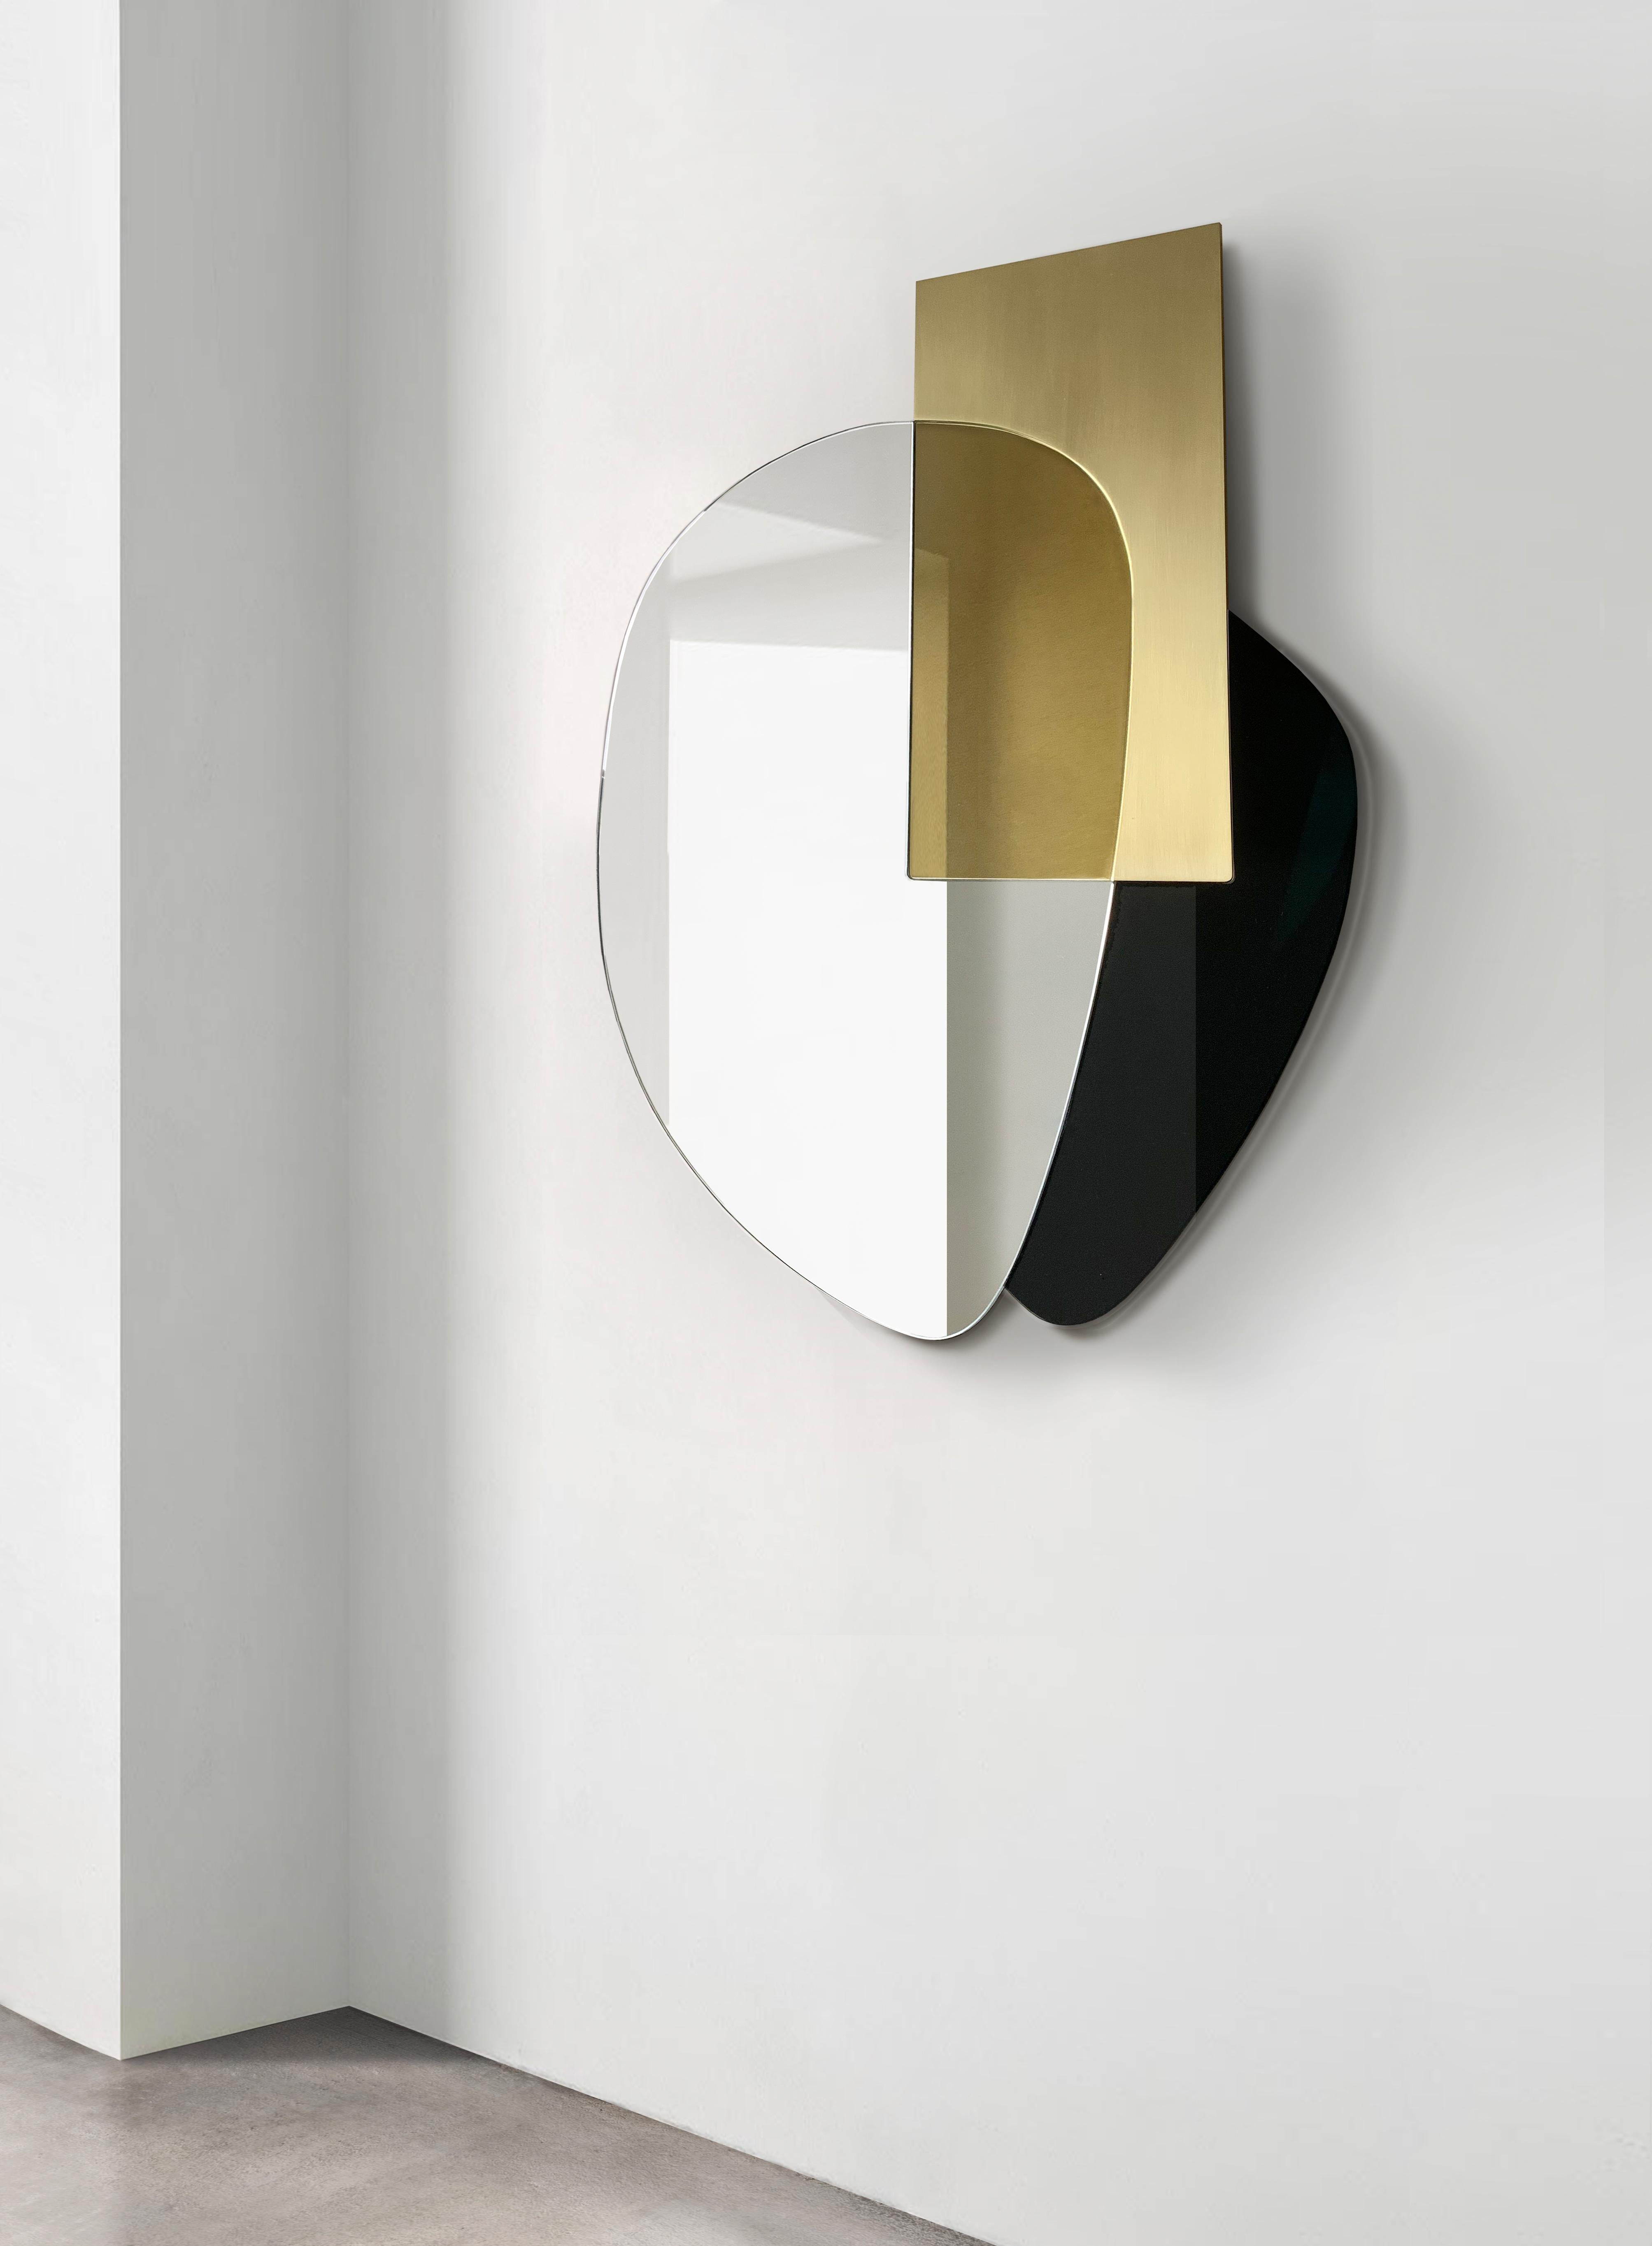 Composizione Astratta mirror is a tribute to light and matter, to reflection and transparency in which coloured mirrors and metal surfaces seem to intersect and intertwine to reveal new poetic and compositional qualities.
The apparent transparency